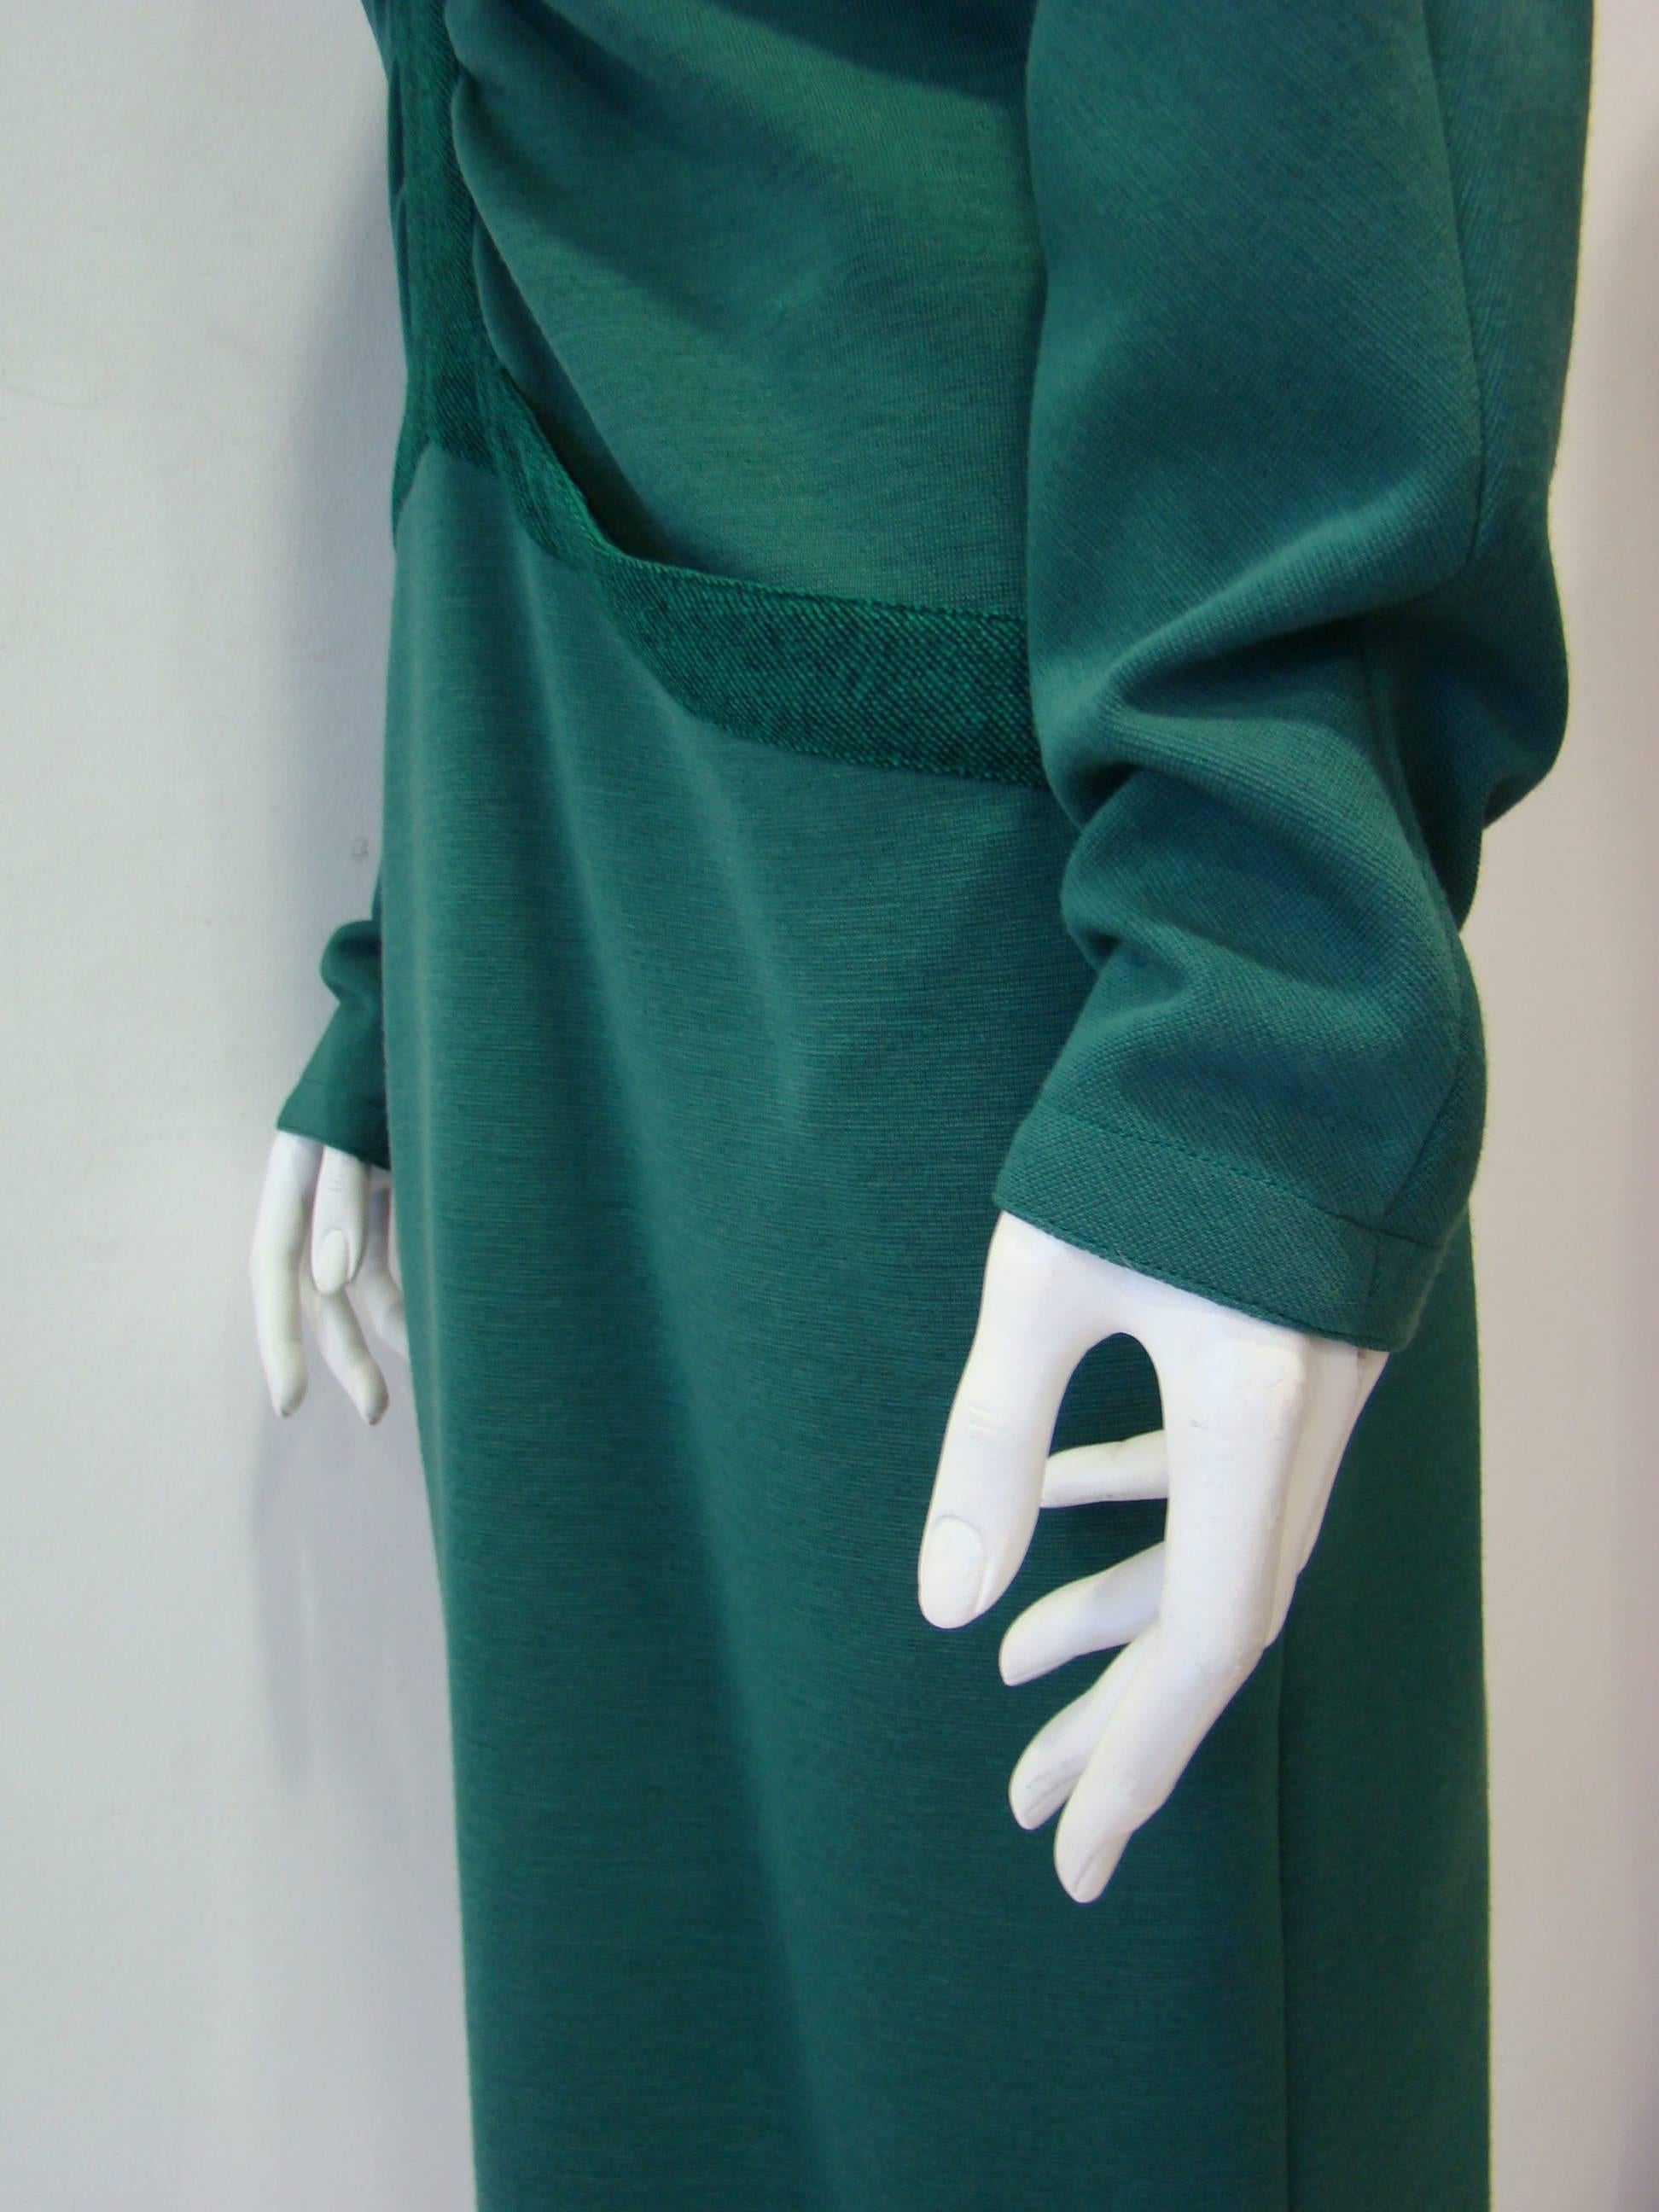 Gianni Versace Wool Dress, 1983 In New Condition For Sale In Athens, Agia Paraskevi